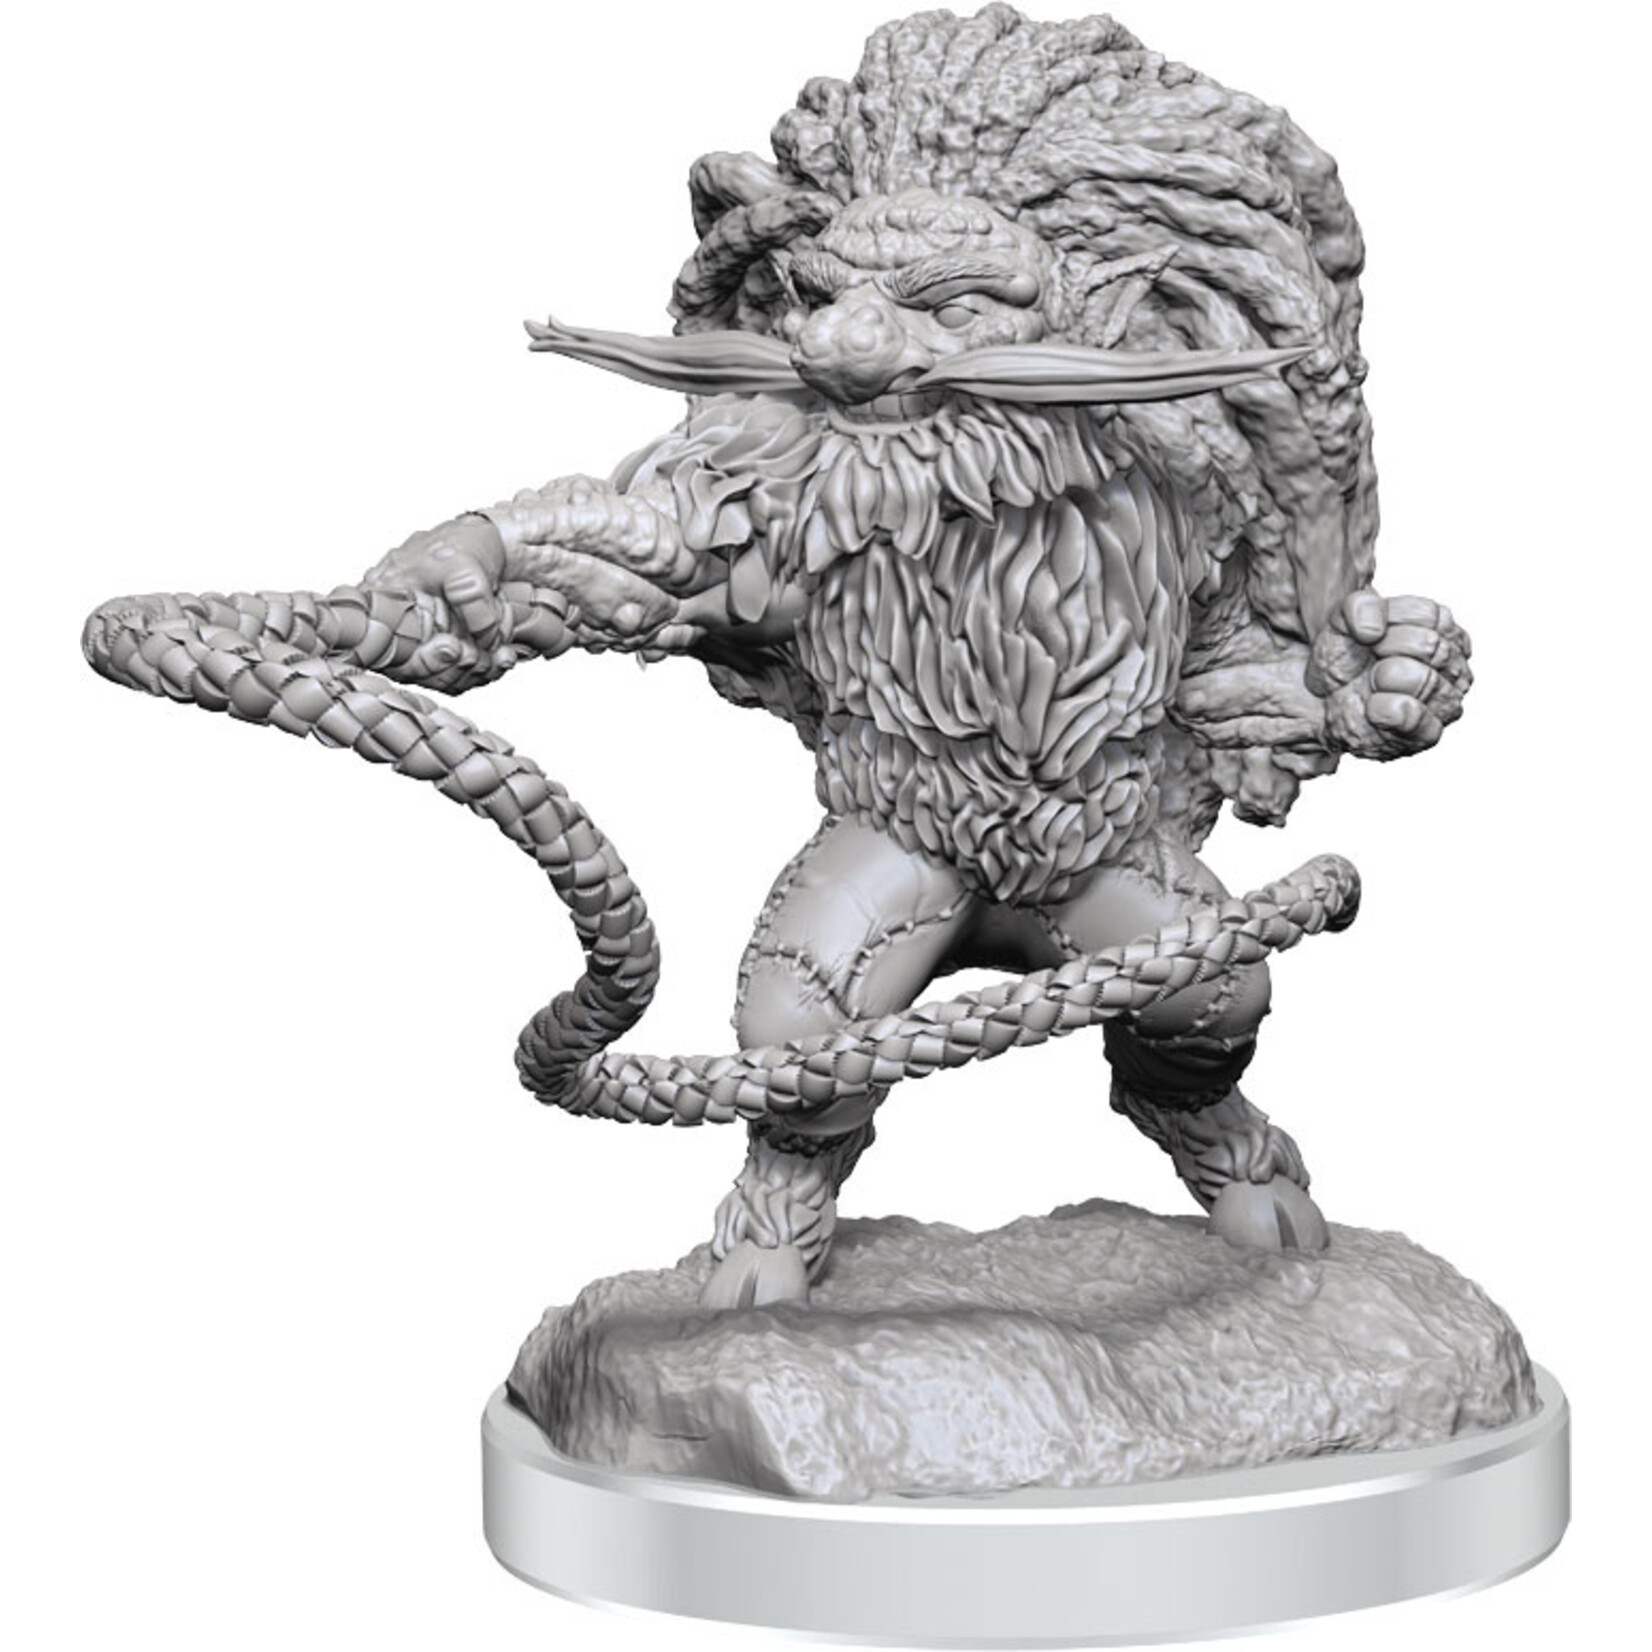 3D Printable Yeti kid by Roleplaying & Miniatures